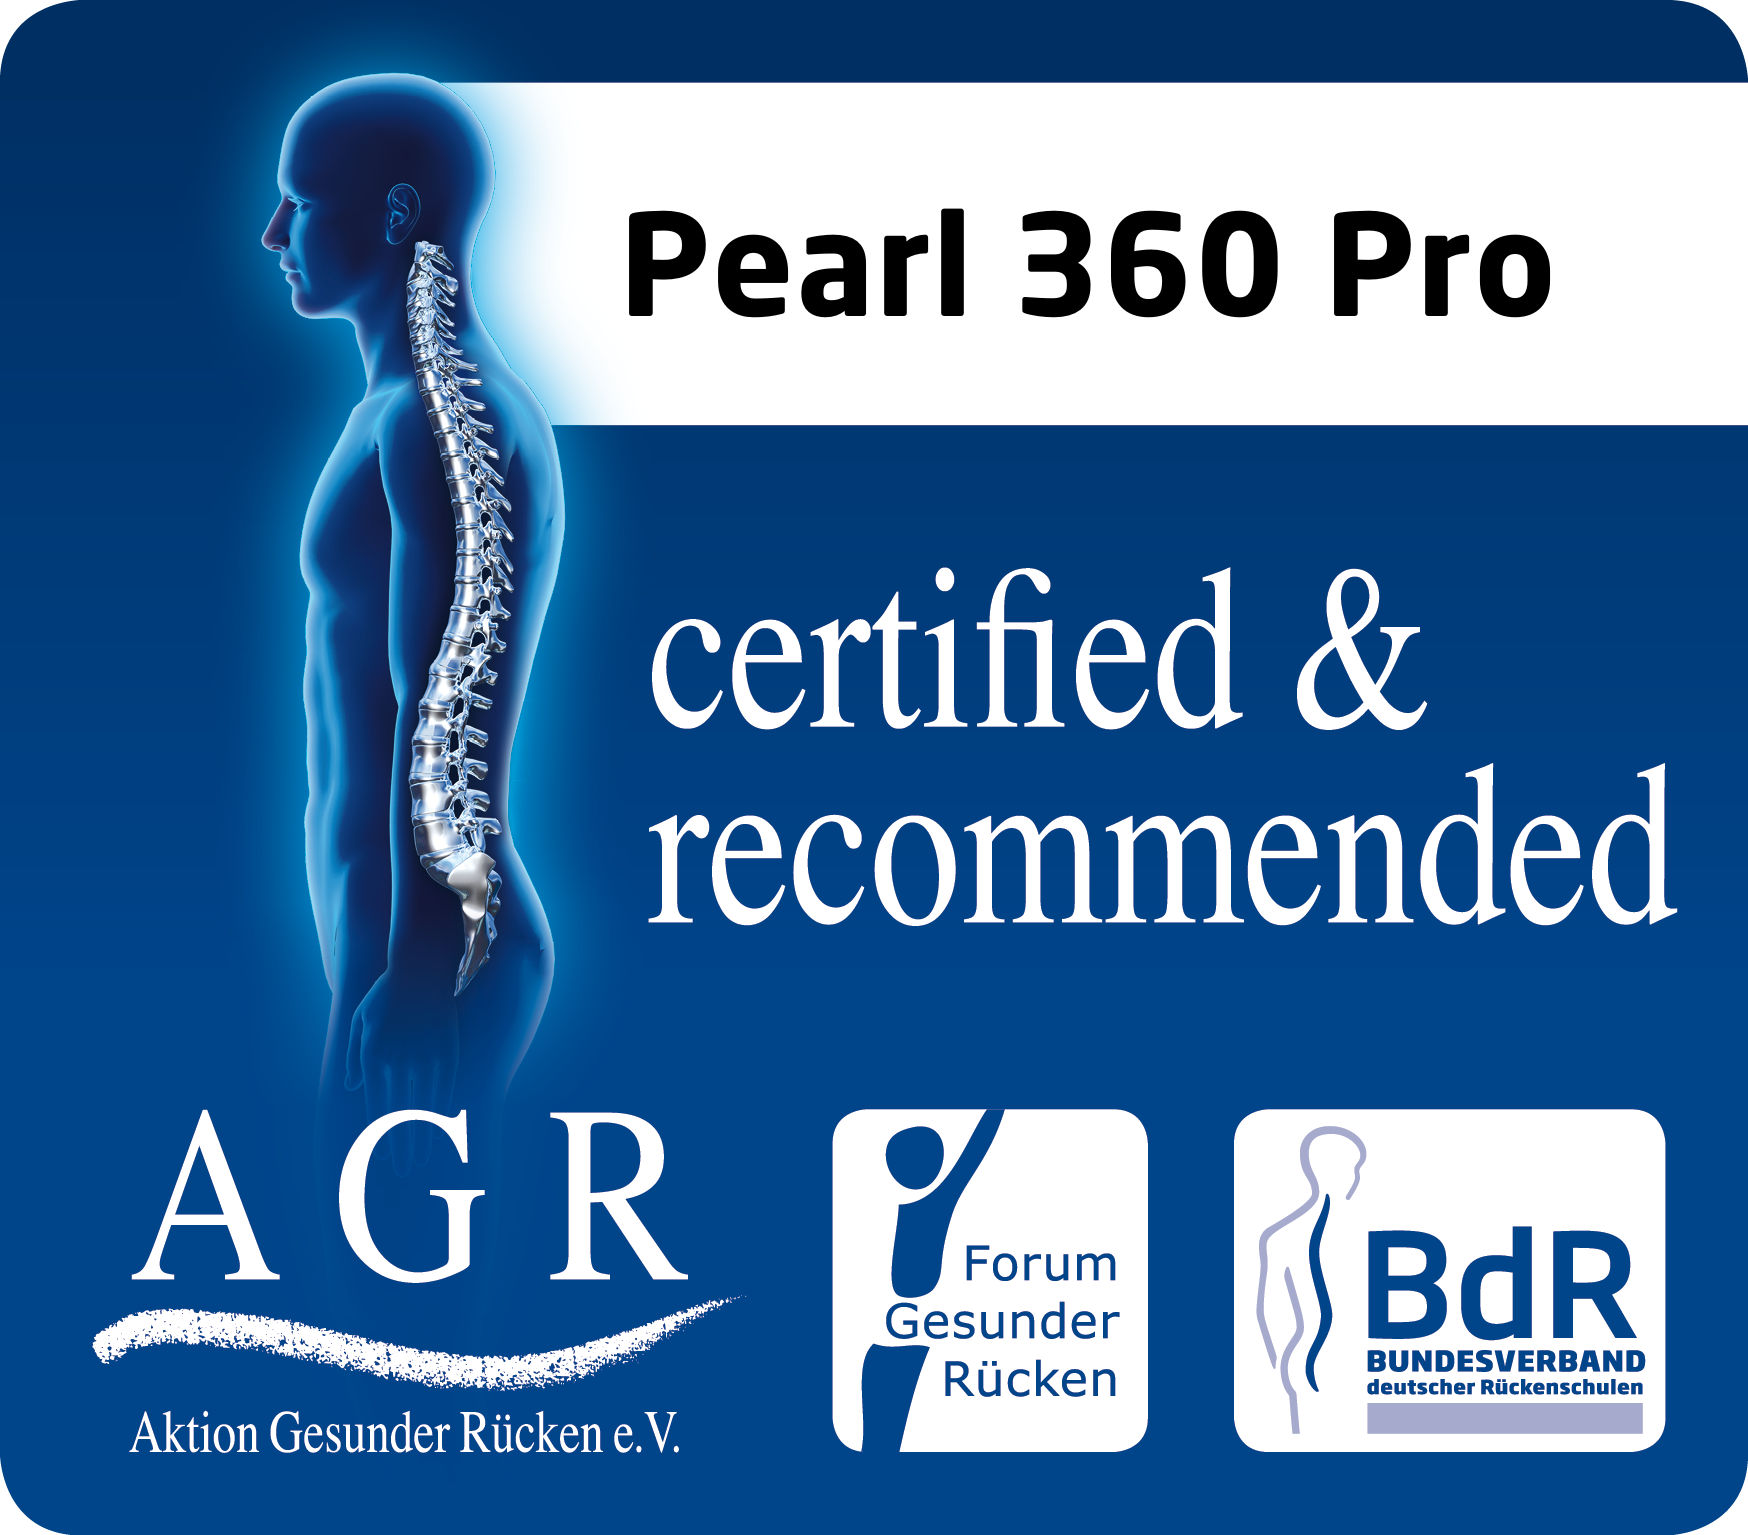 AGR Certificate for Maxi-Cosi Pearl 360 Pro